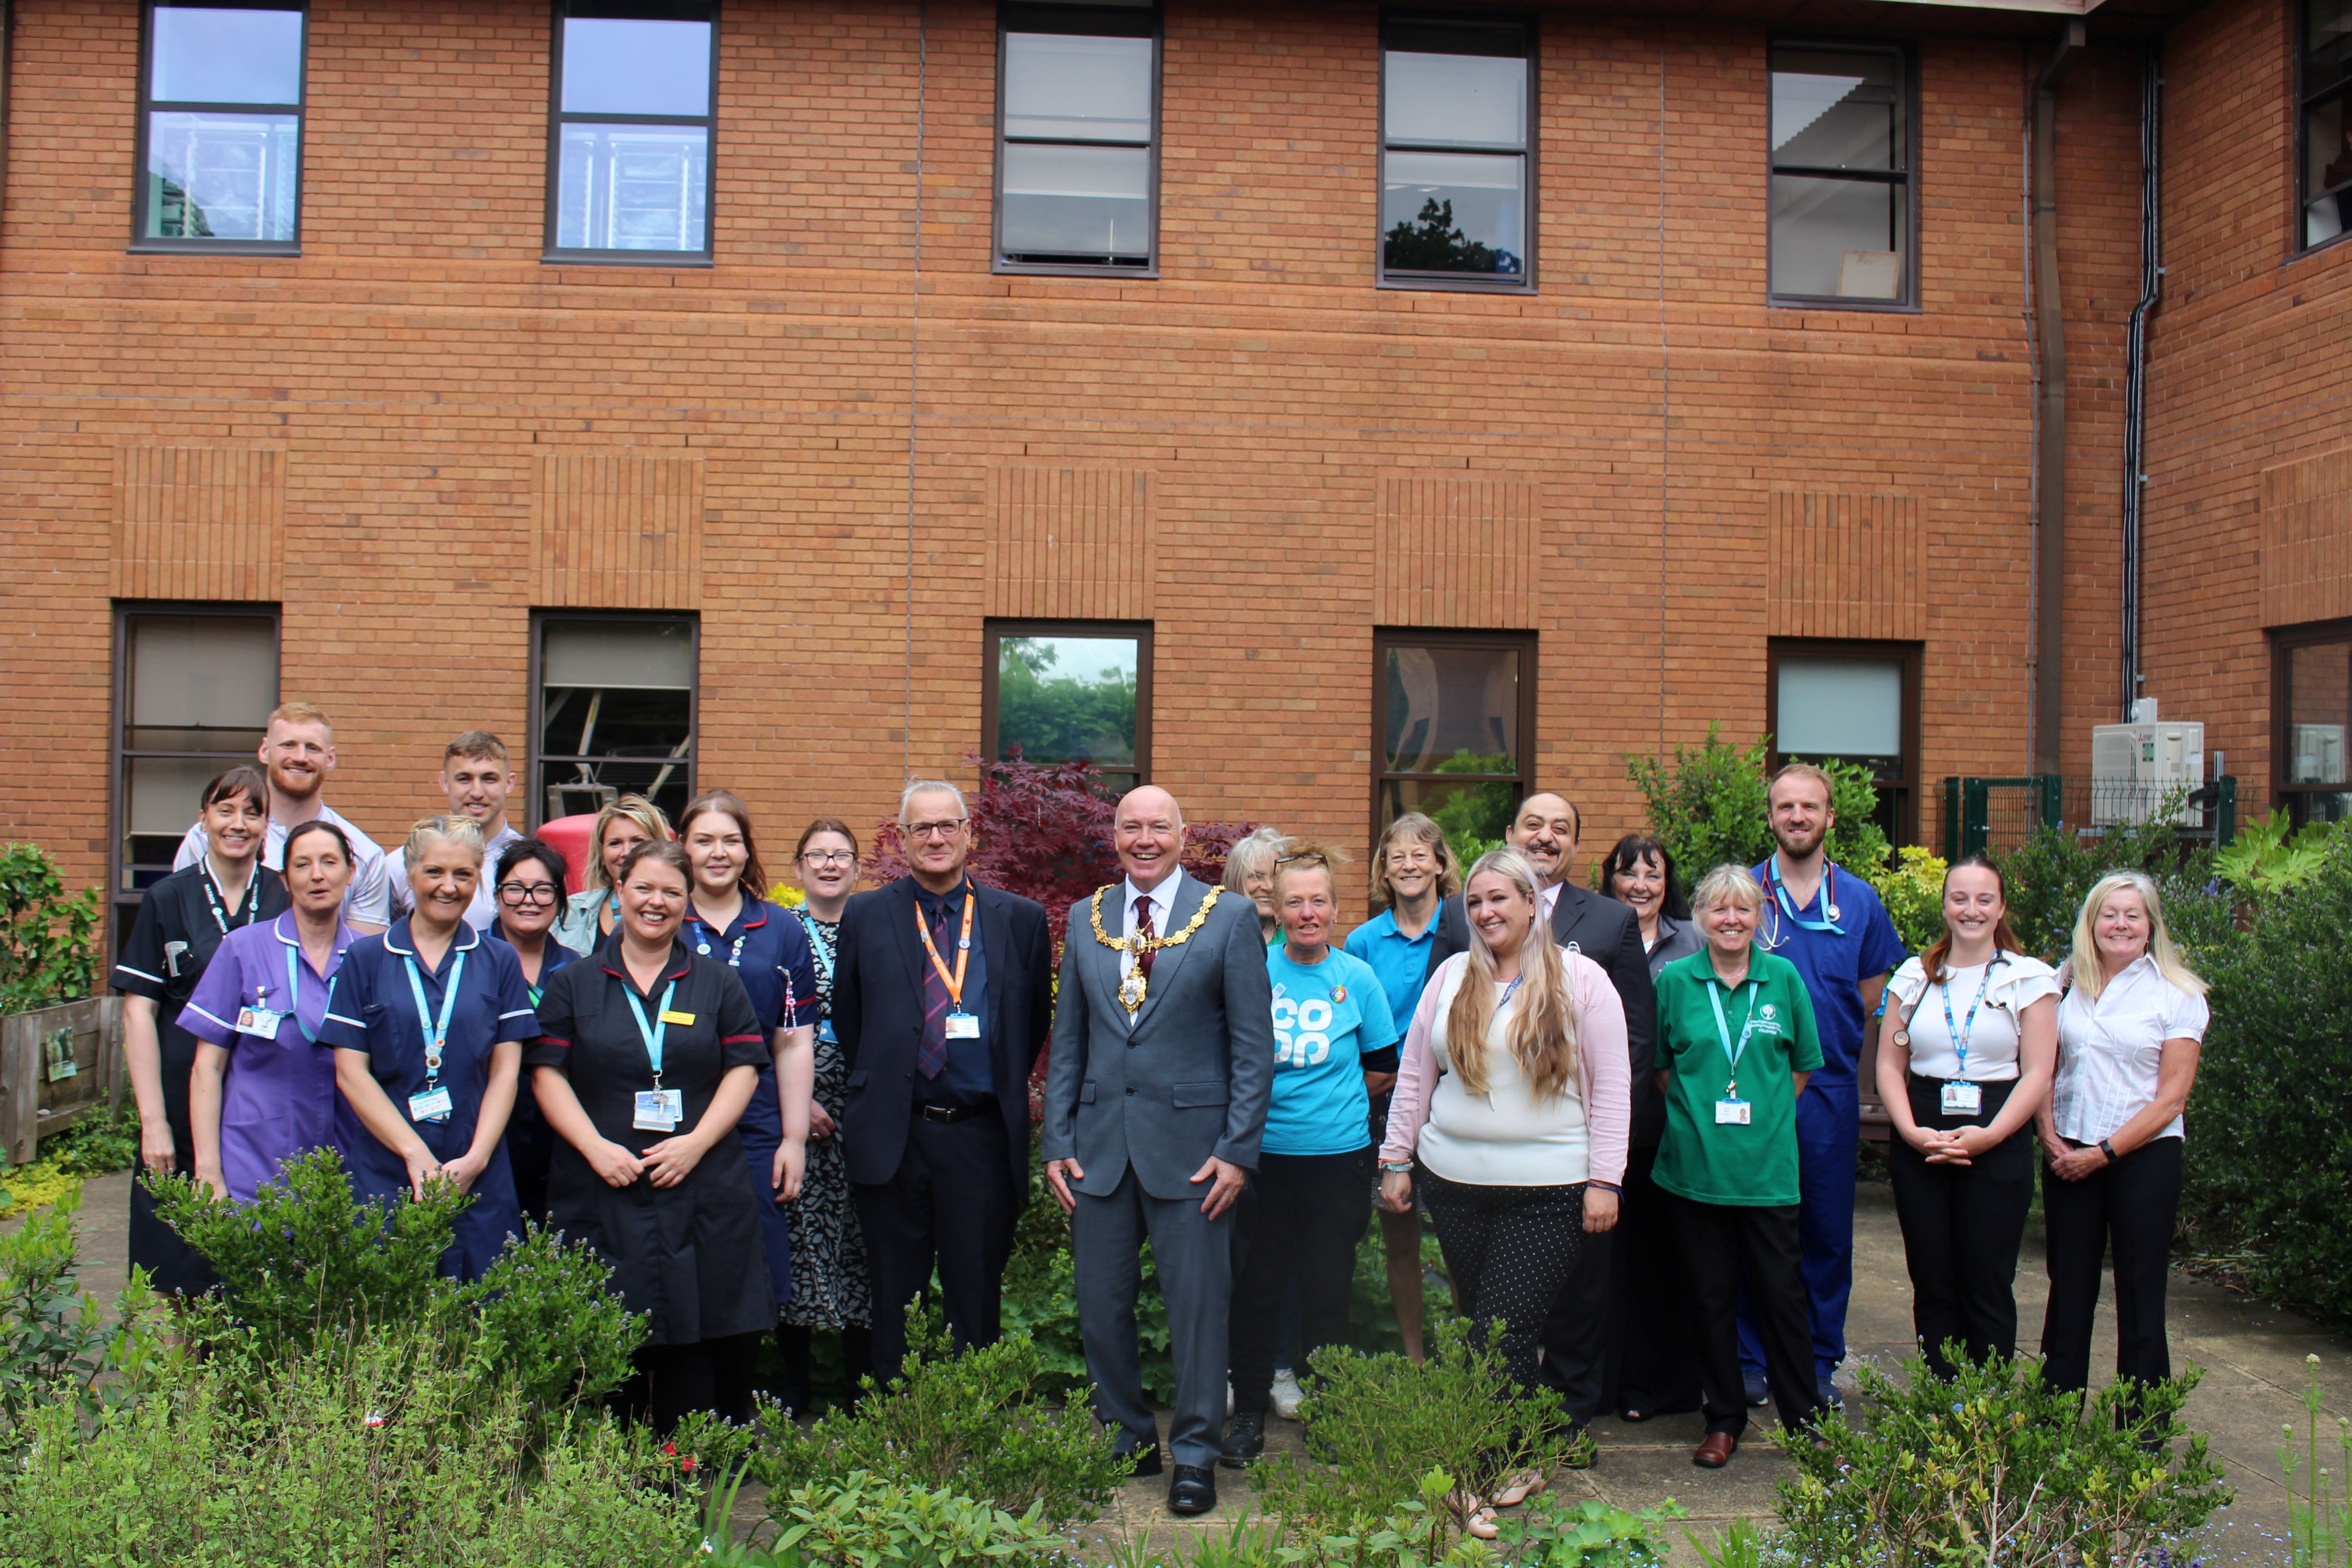 3.	Mayor of Warrington with ward staff, volunteers and supporters at 10-year anniversary celebration event 